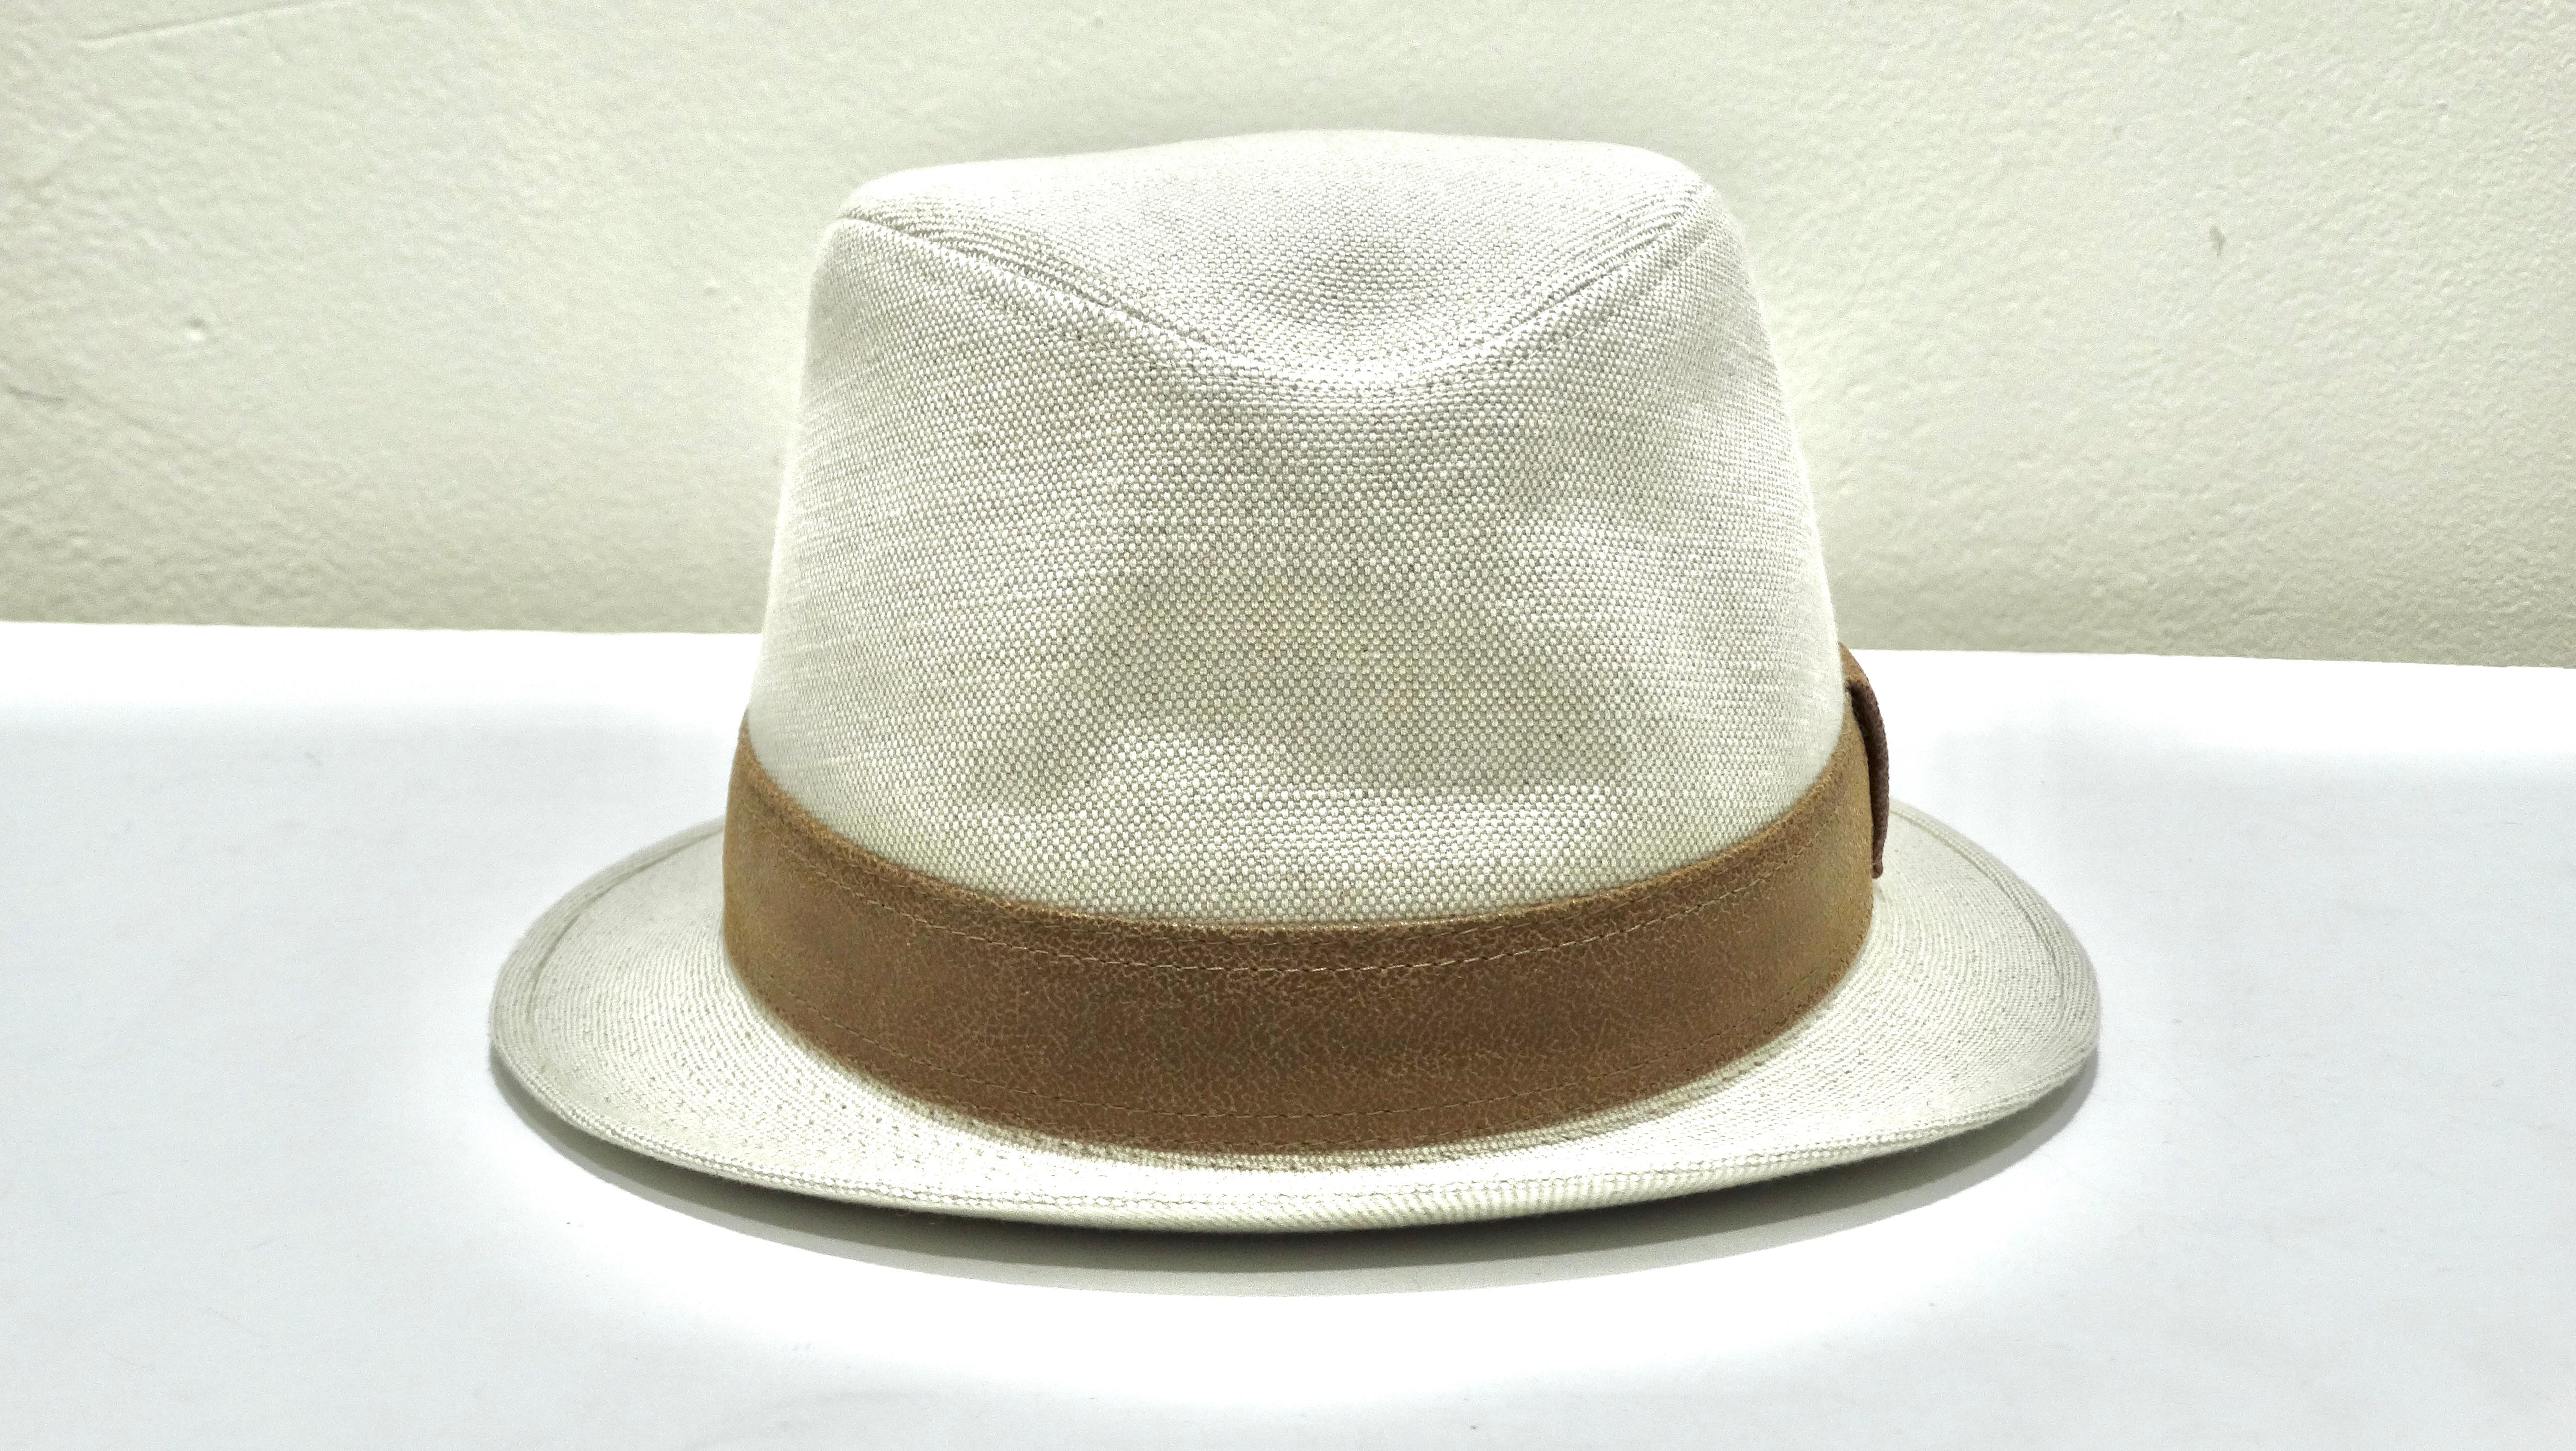 This off white Hermes hat with a classic brown strap is a simplistic and stylish look that shows class. Bringing out both feminine and masculine undertones this hat can be worn by any gender. The hat is creased down the center toward the crown to